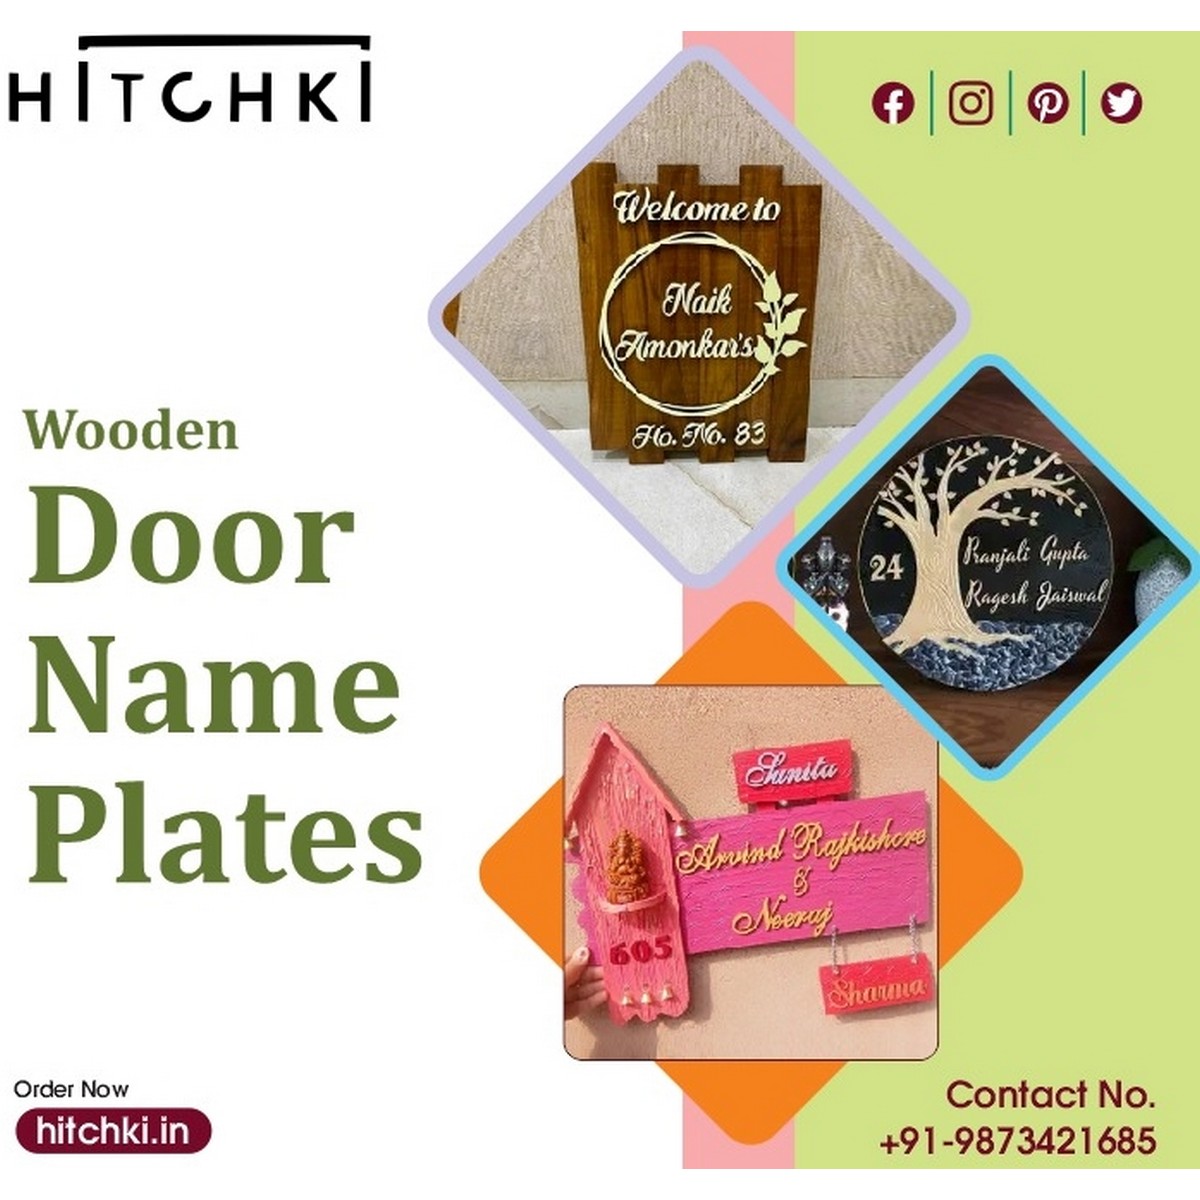 Wooden Door Name Plates for Childrens Rooms and Bedrooms Name Plates 